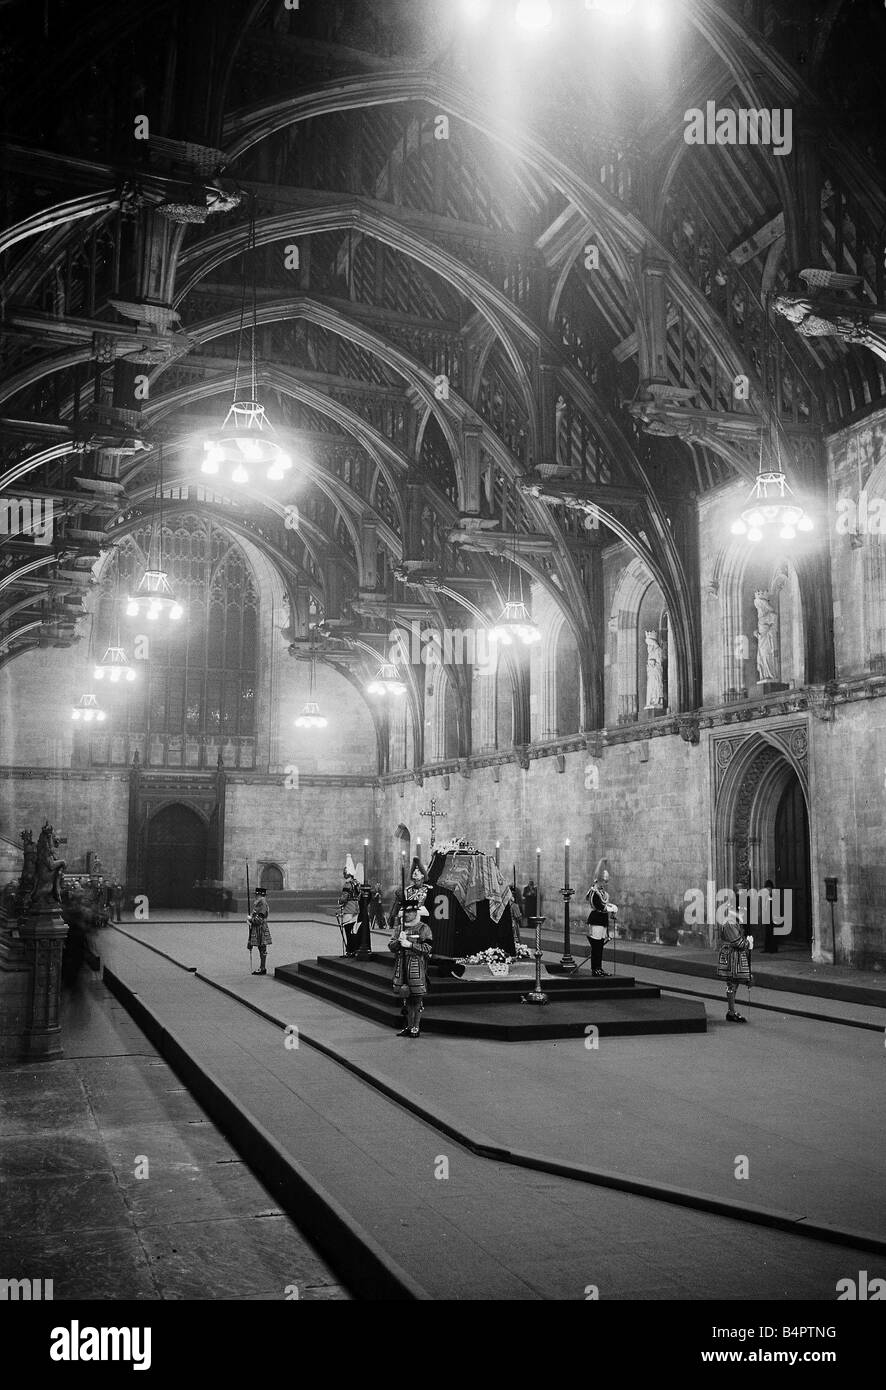 King George VI Death State Funeral Feb 1952 Laying in state in Westminster Hall in London Stock Photo